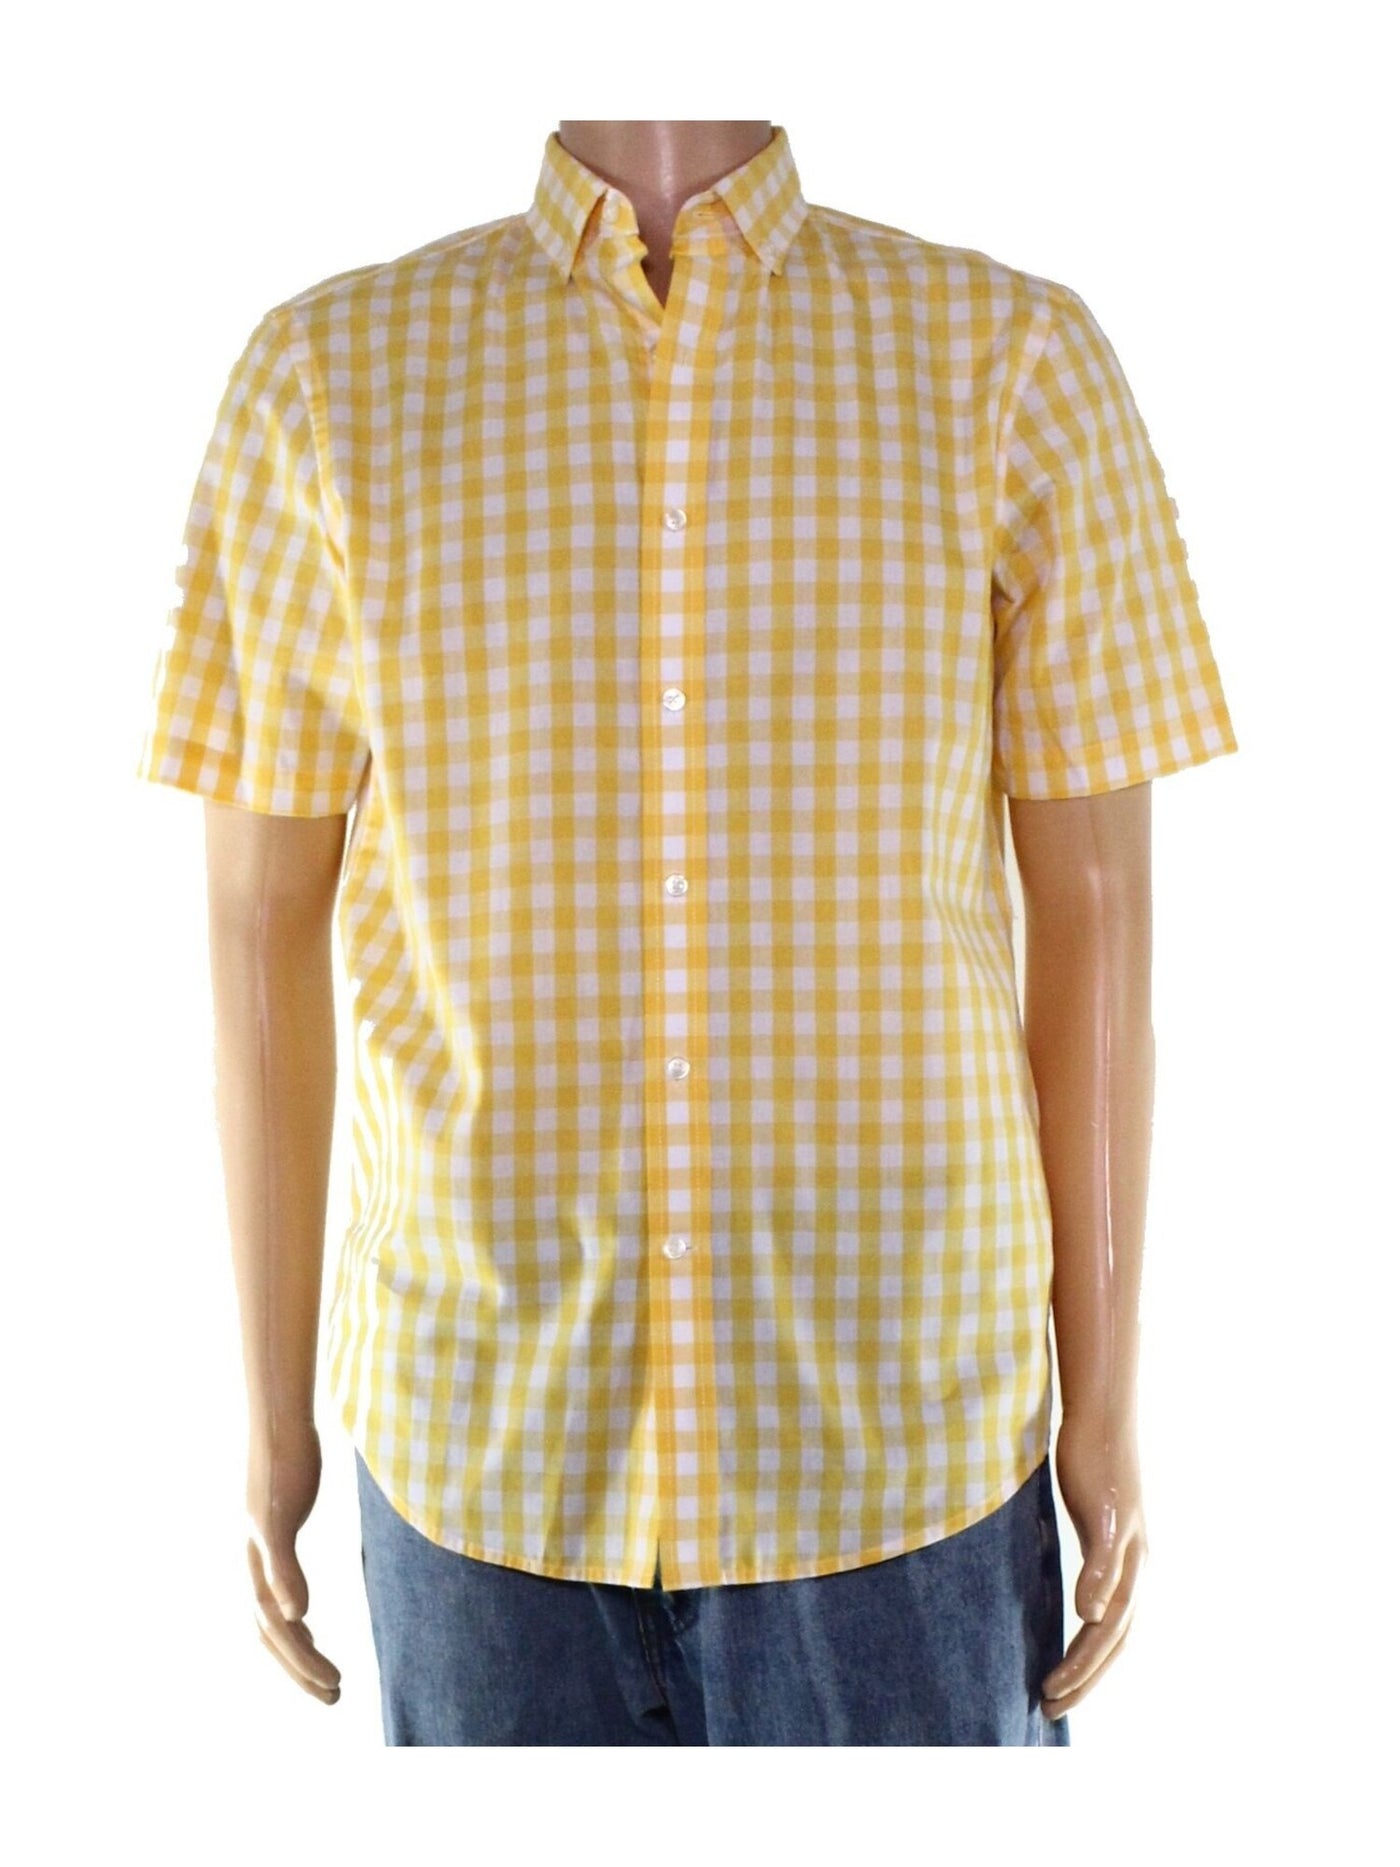 CLUBROOM Mens Yellow Multi-Check Collared Classic Fit Dress Shirt S